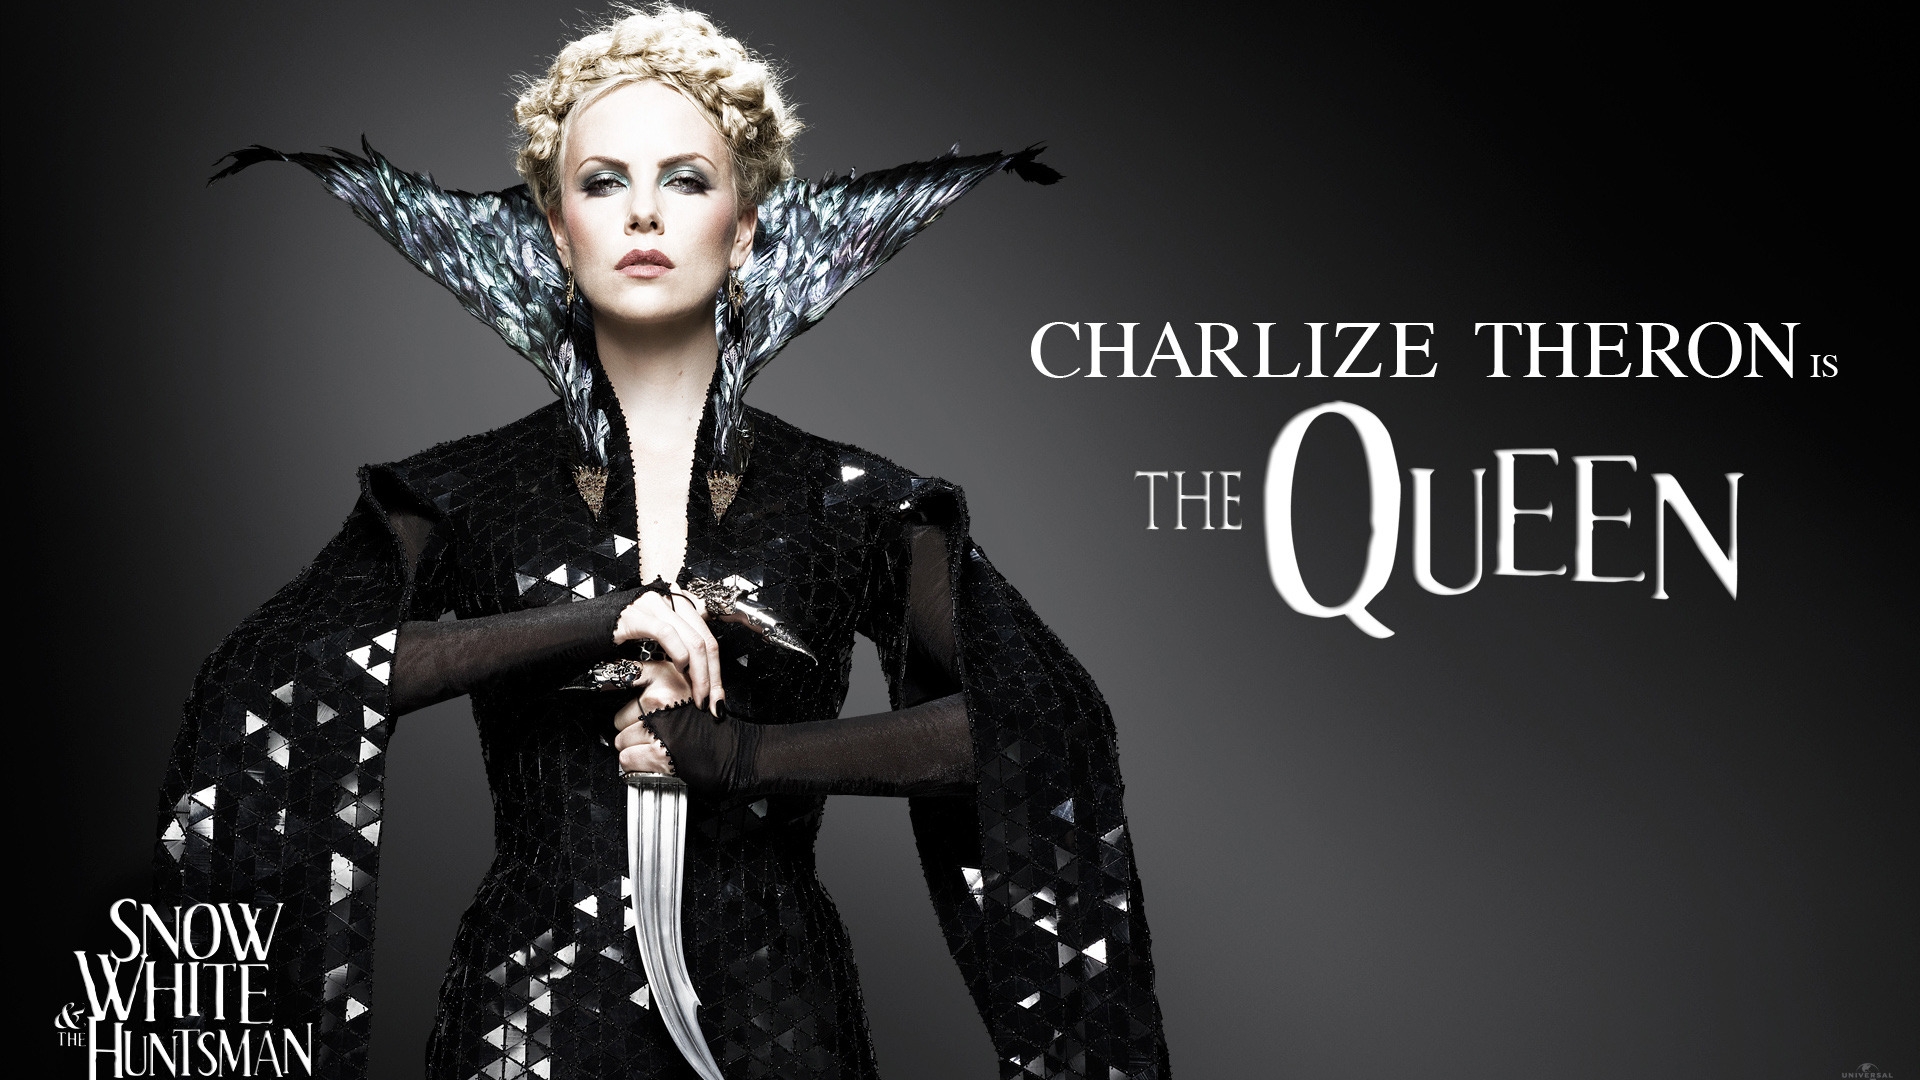 Charlize Theron The Queen for 1920 x 1080 HDTV 1080p resolution